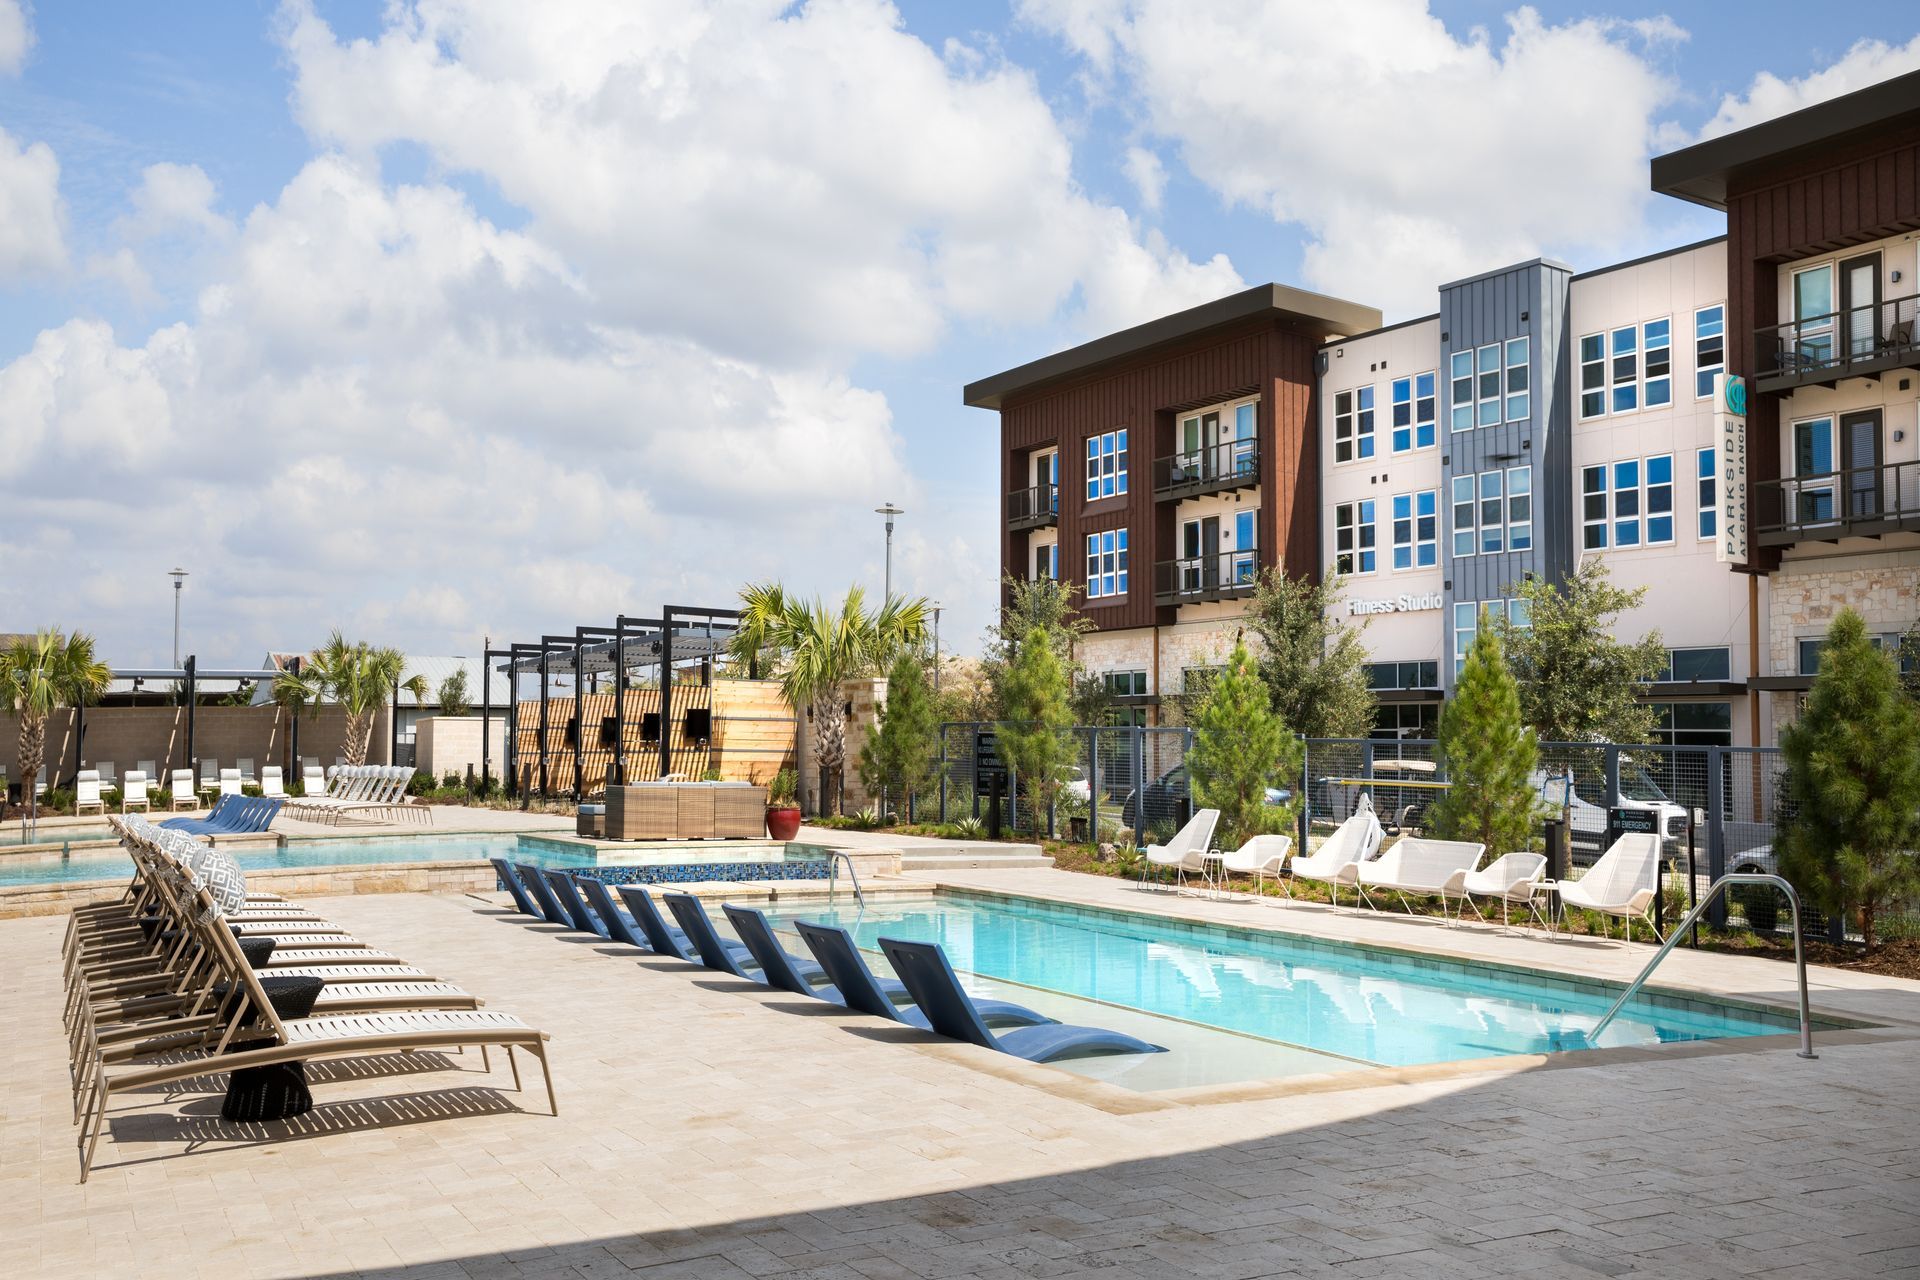 There is a large swimming pool in front of the apartment building at Parkside at Craig Ranch with chairs. 